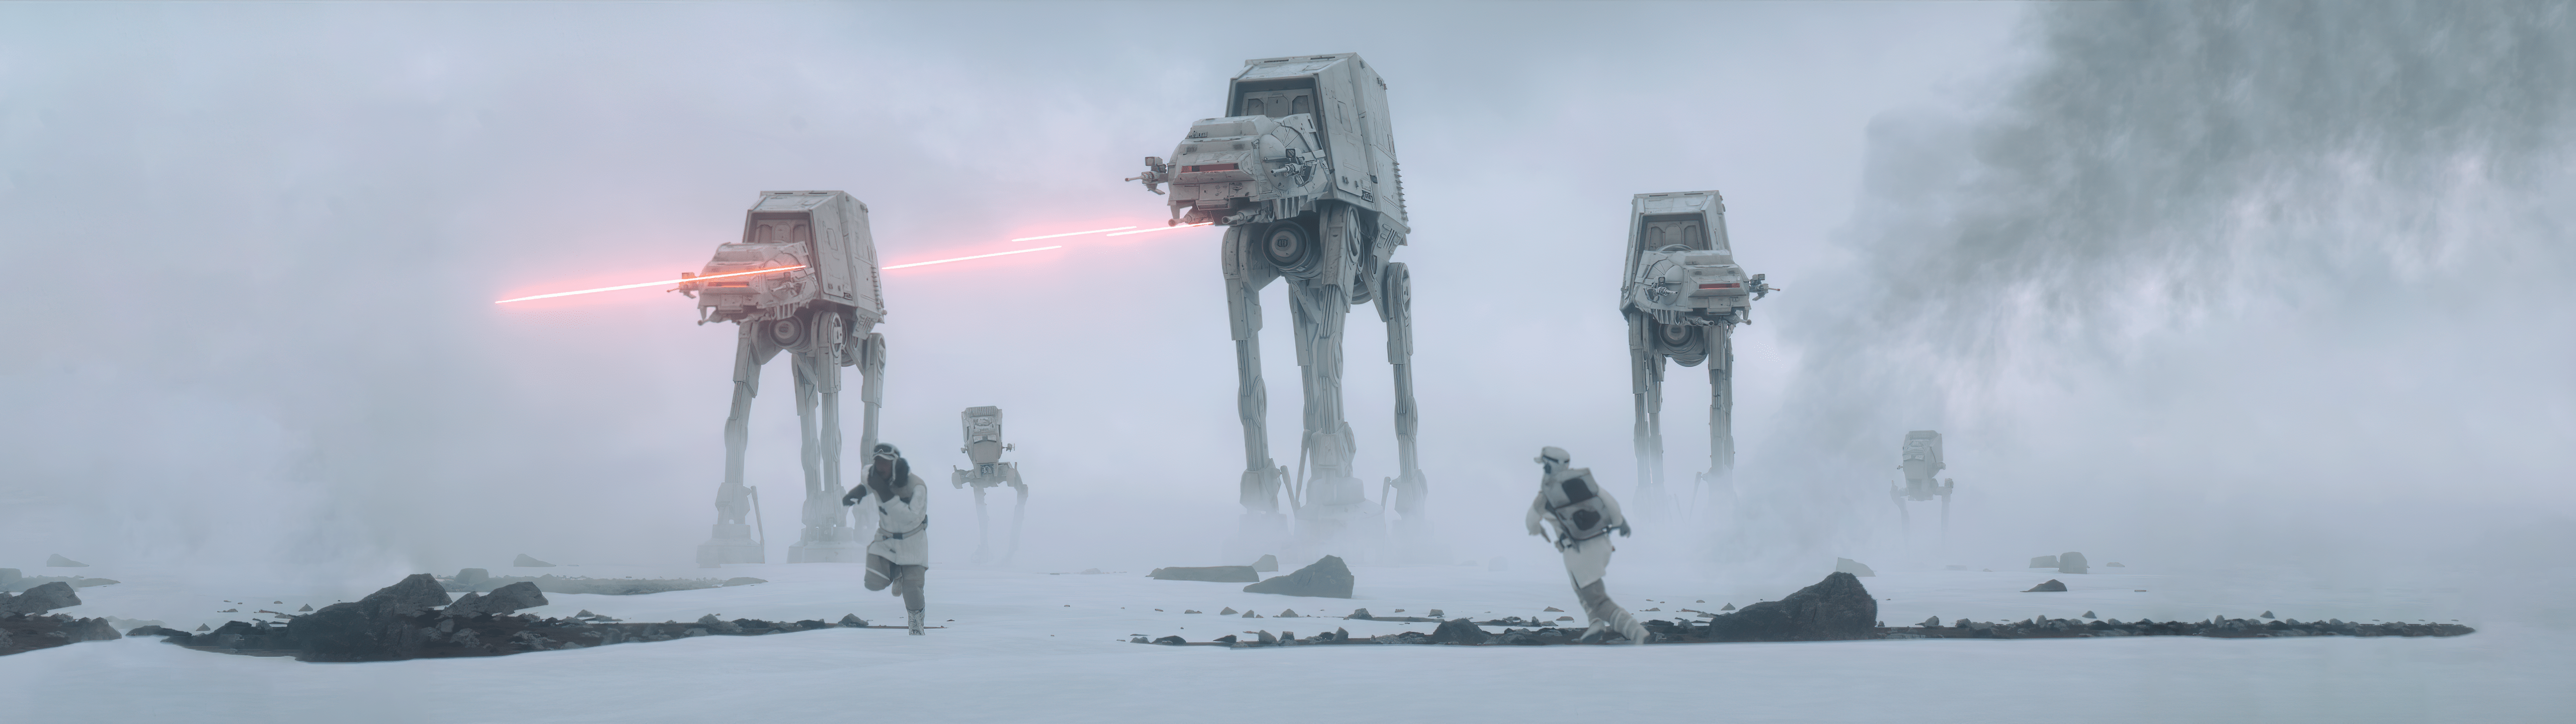 AT-ATs move through the snow in Star Wars: The Empire Strikes Back. - 5120x1440